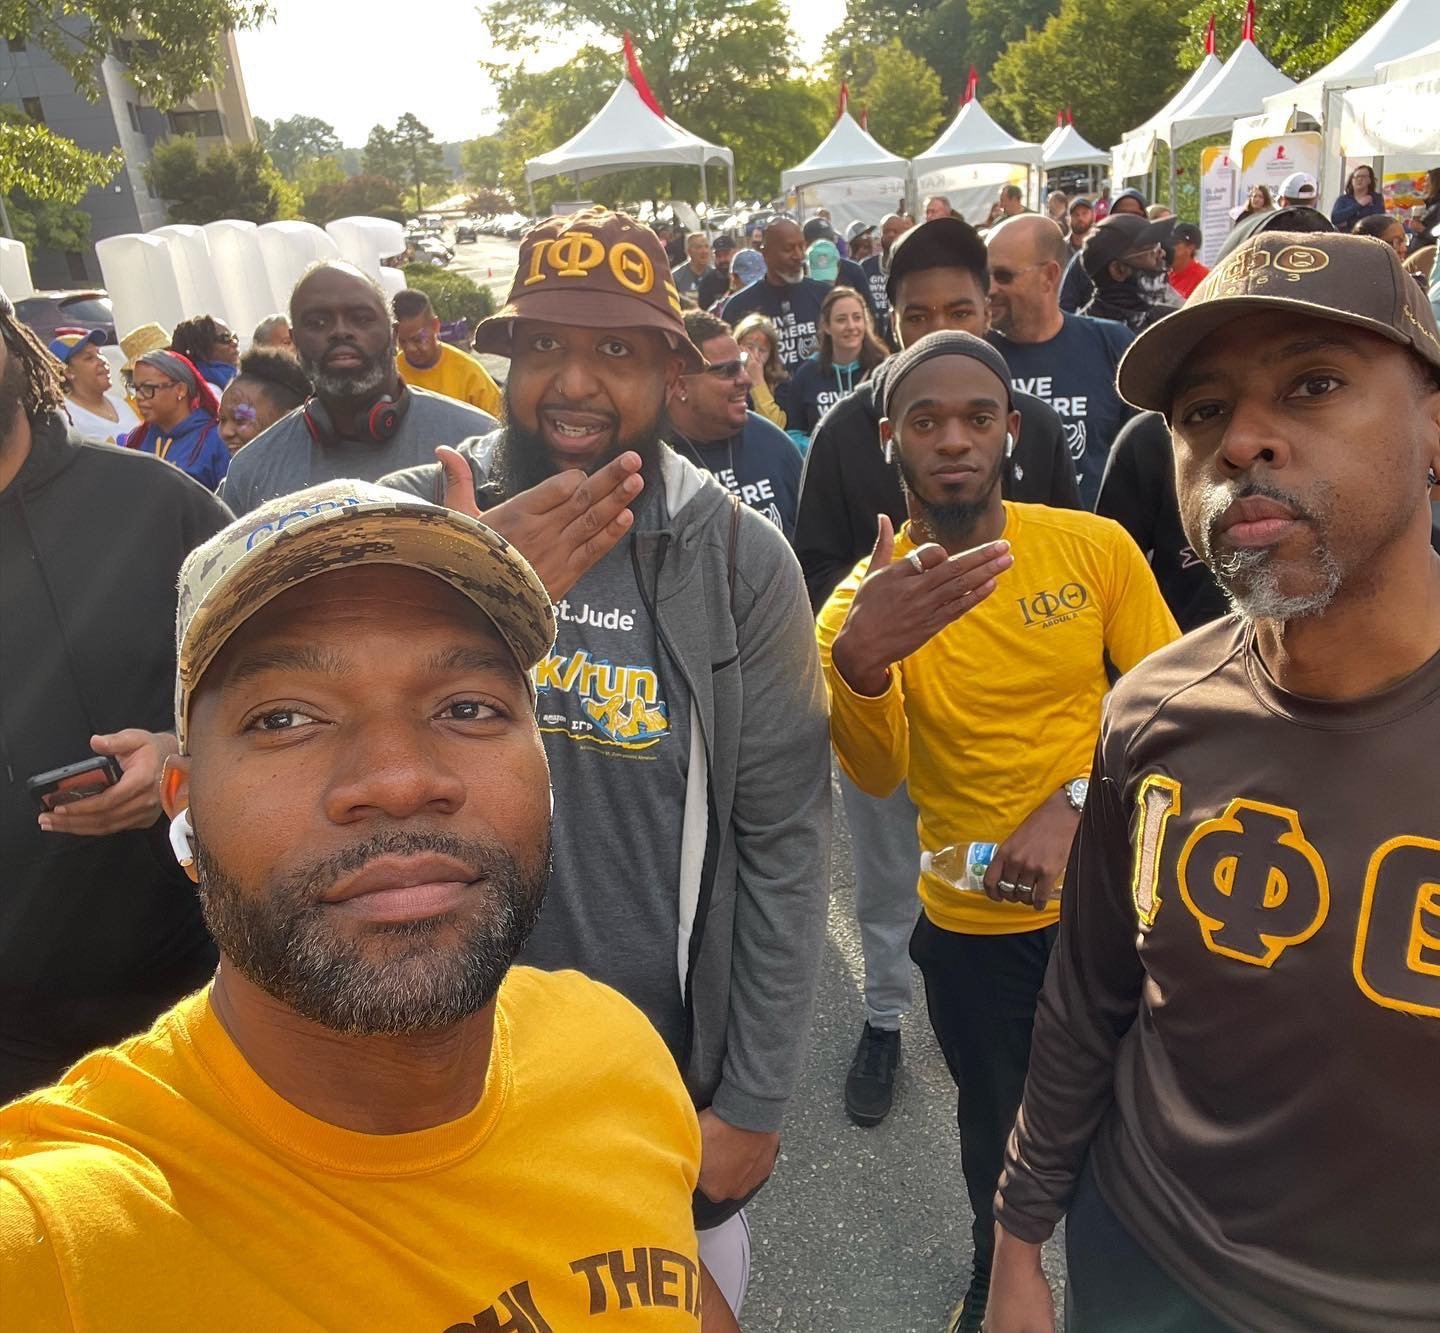 AEO and AOO Iotas at St. Jude Walk in September 2022.